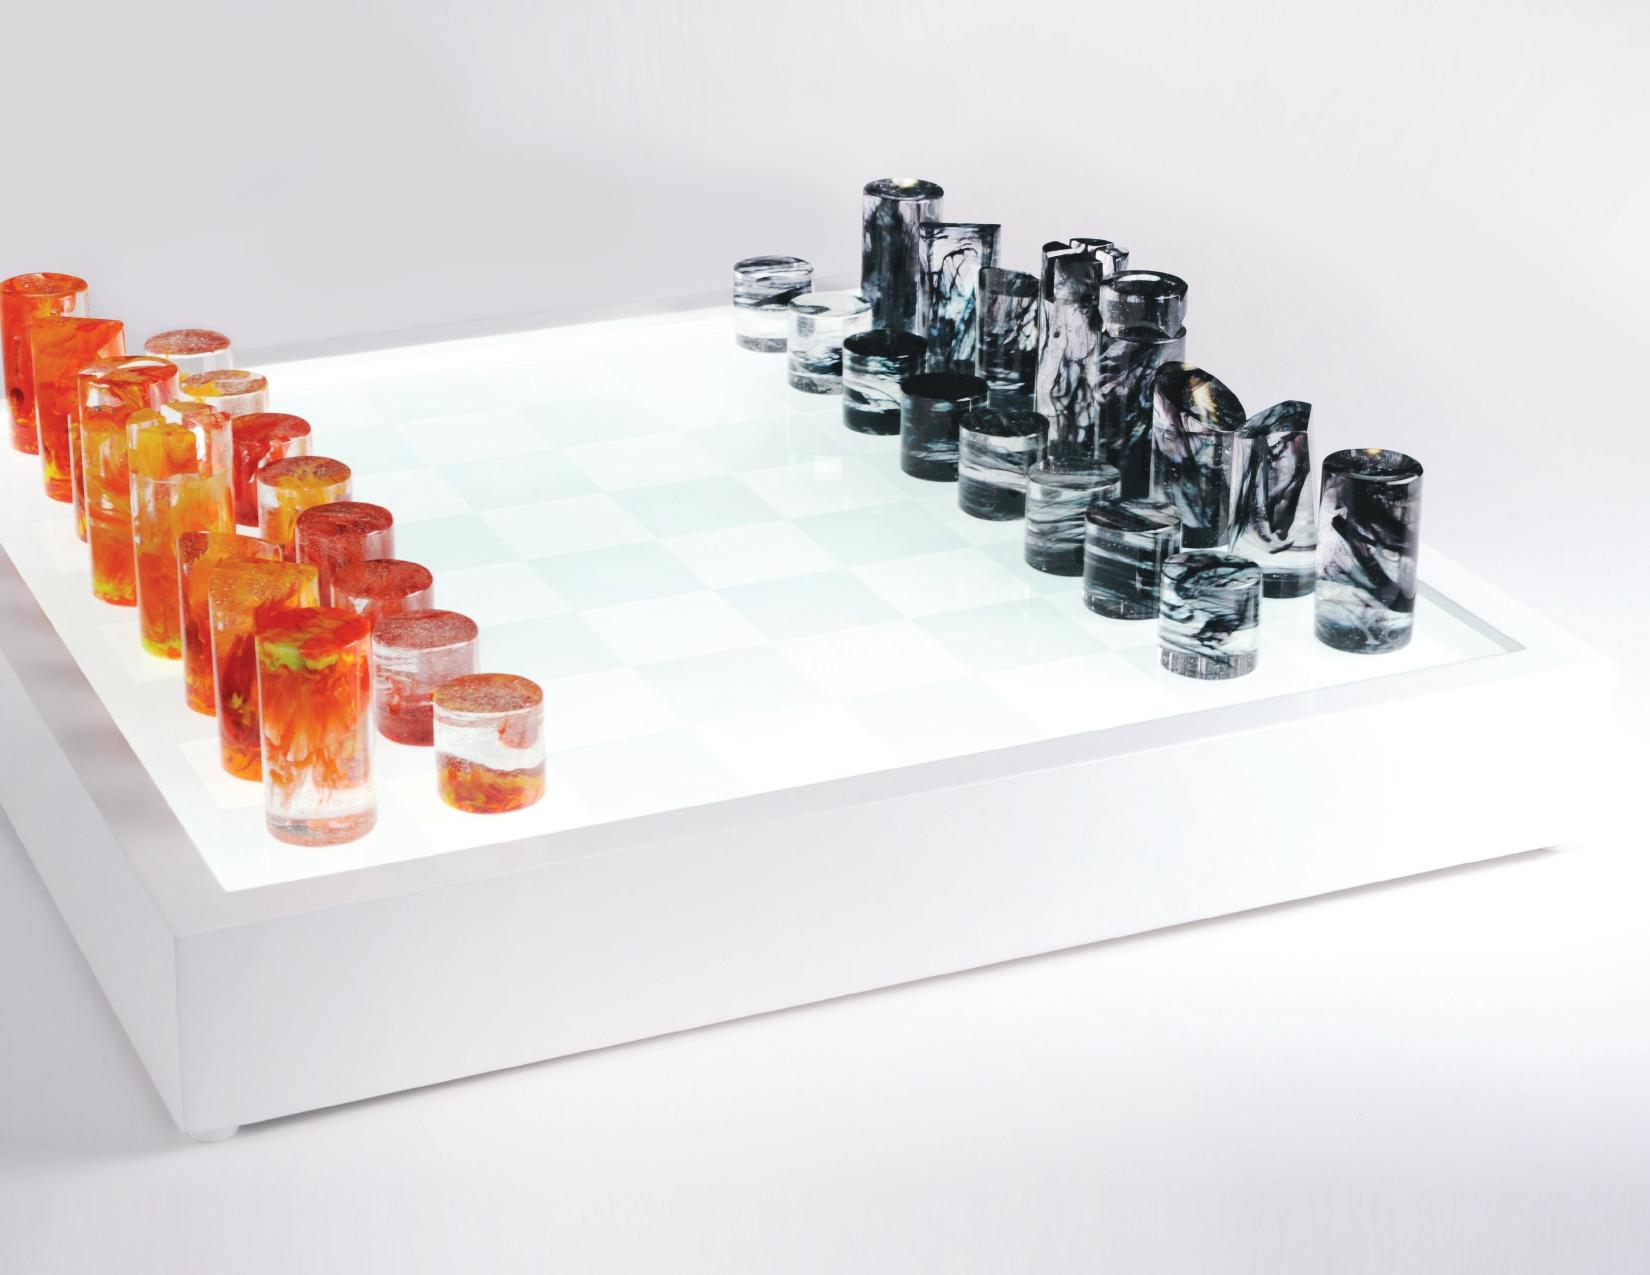 This chess belongs to the Board Games collection designed by Orfeo Quagliata.

Exclusive techniques from the artist. 100% handmade with highest quality material. The chess pieces fabricated under the cast glass technique represent Orfeo's